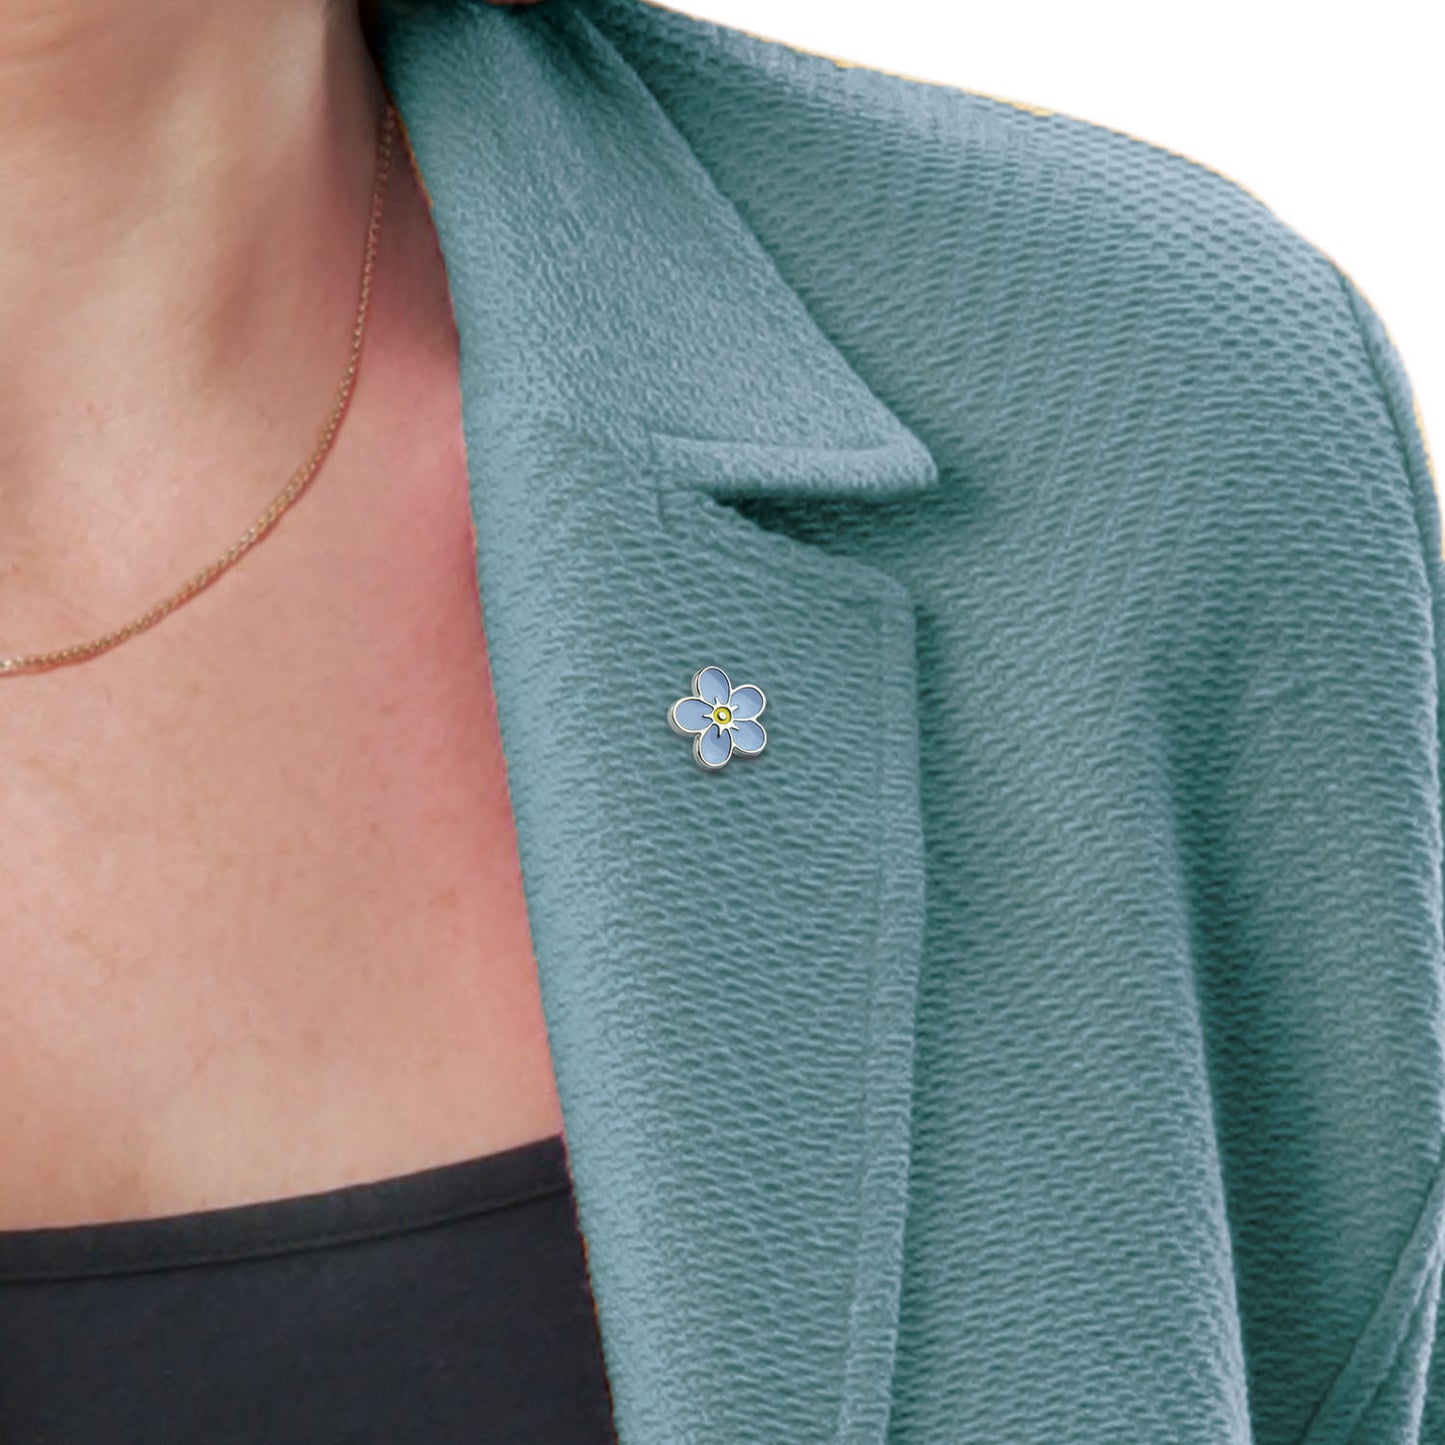 Forget-Me-Not Flower Pin